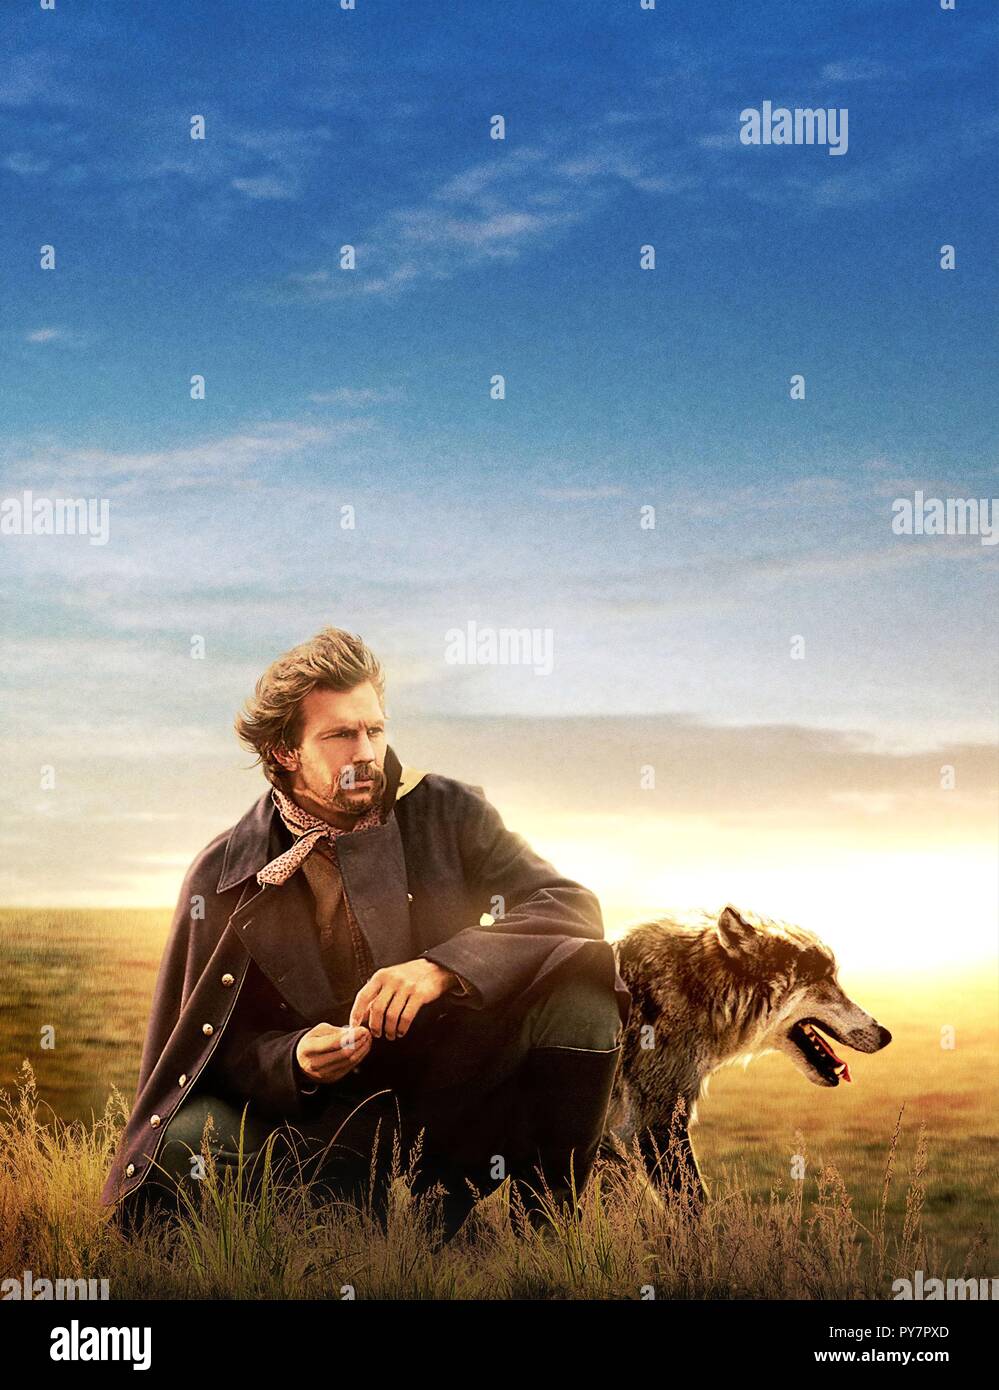 Original film title: DANCES WITH WOLVES. English title: DANCES WITH WOLVES. Year: 1990. Director: KEVIN COSTNER. Stars: KEVIN COSTNER. Credit: ORION PICTURES / Album Stock Photo